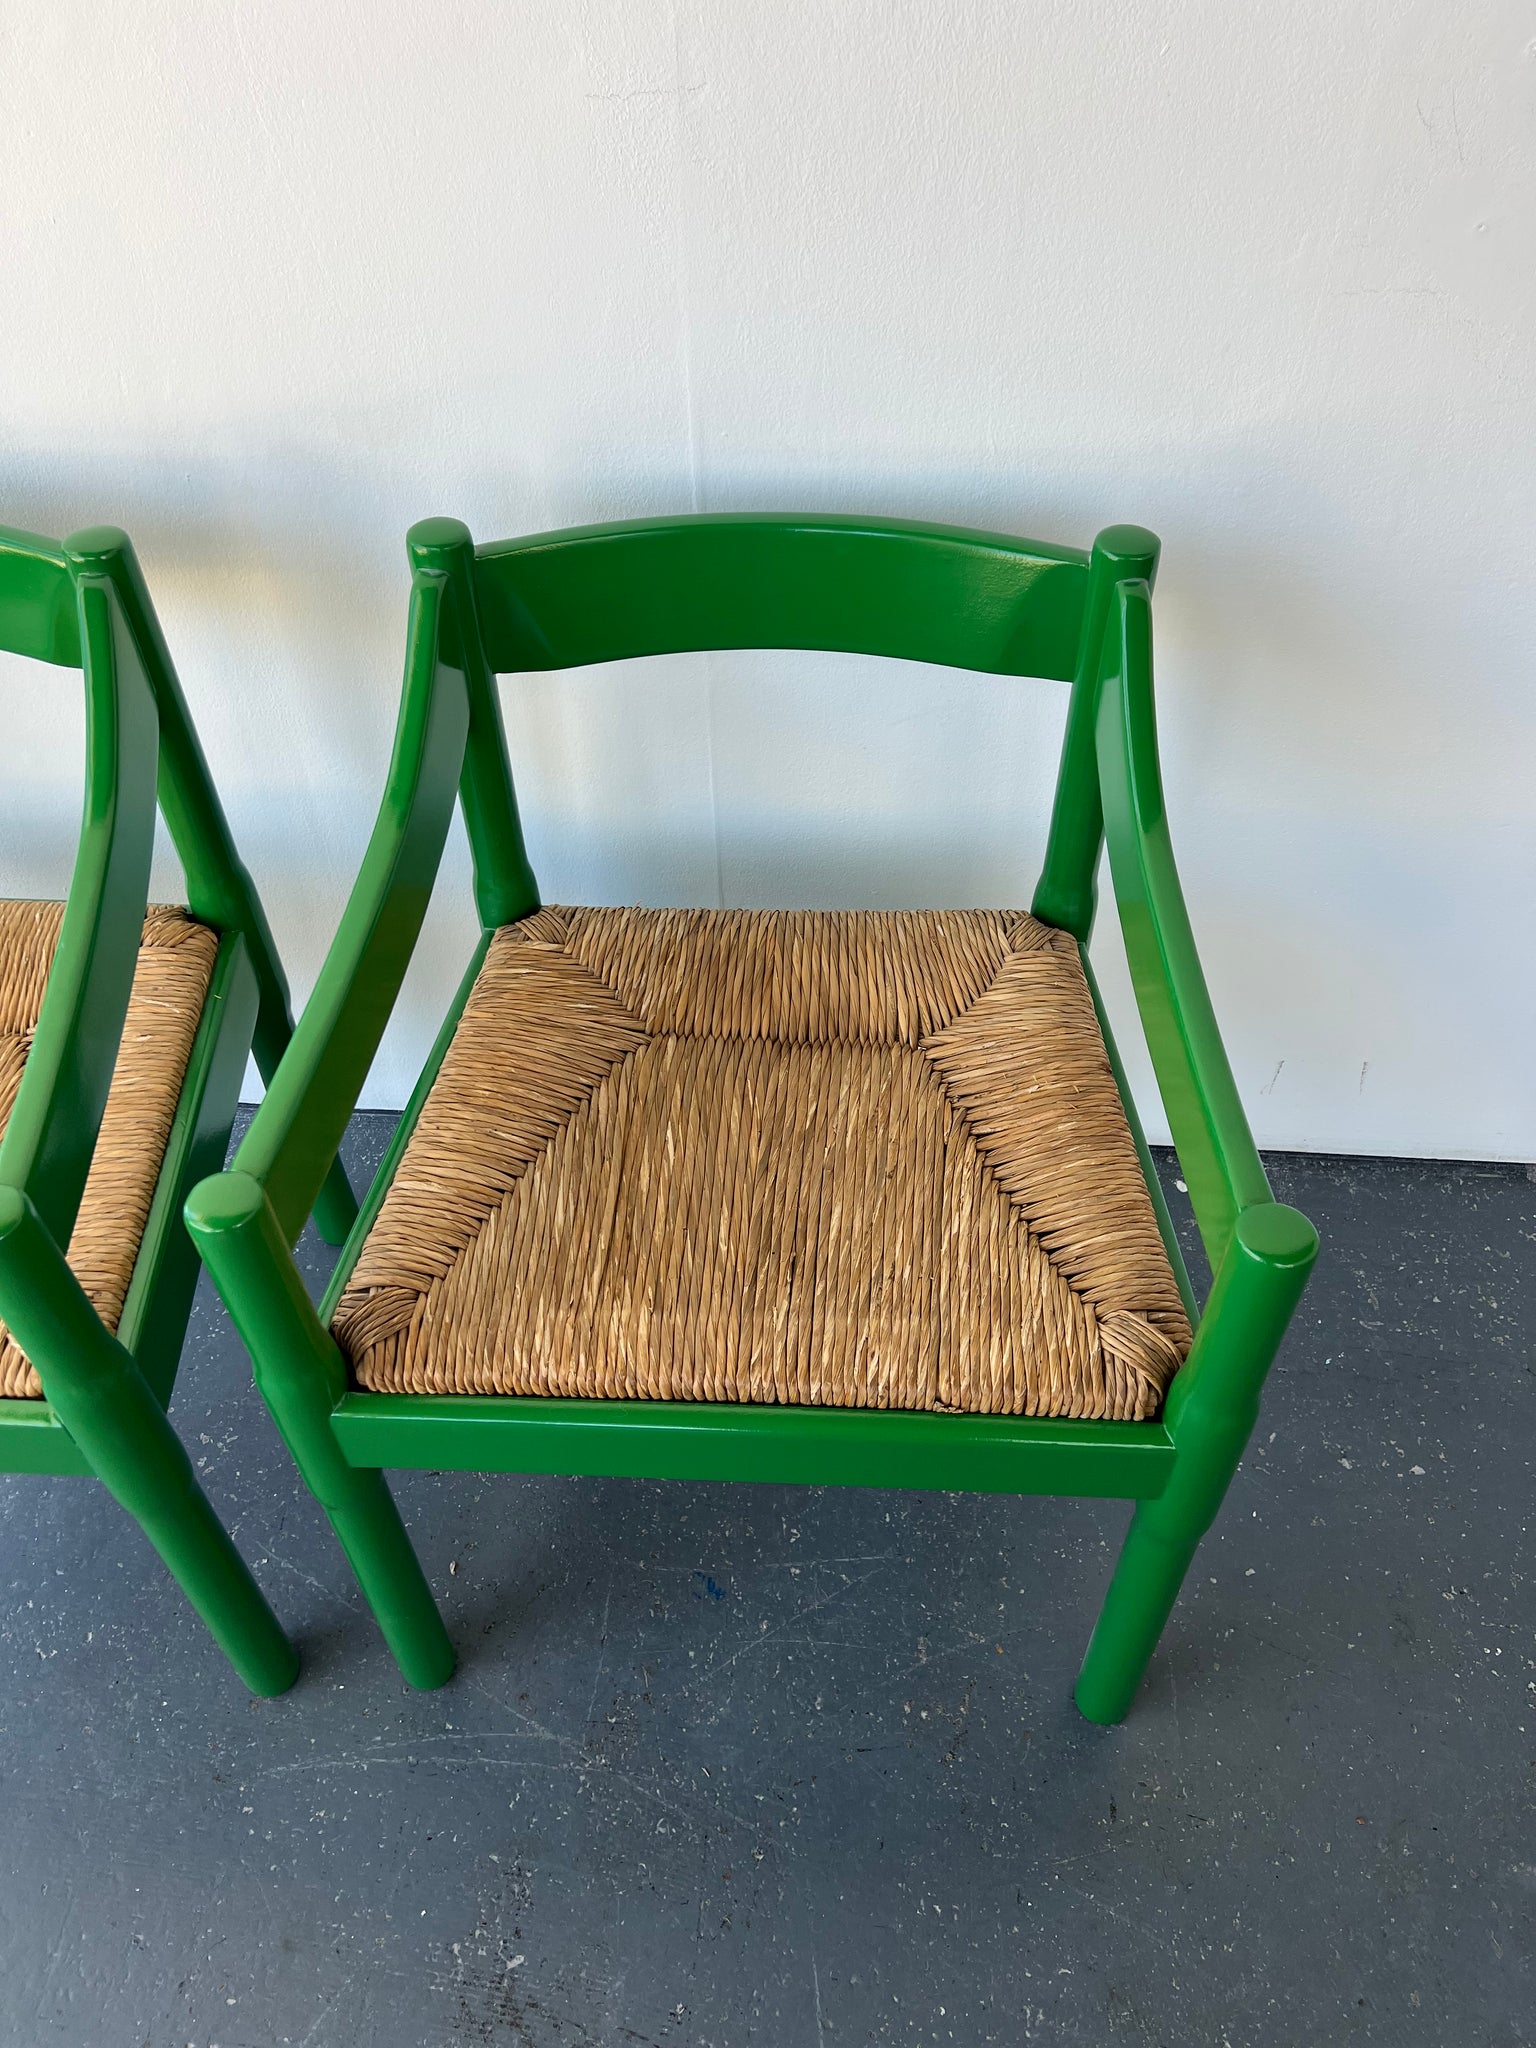 Set of x6 Glossy Green Carimate Carver Chairs by Vico Magistretti